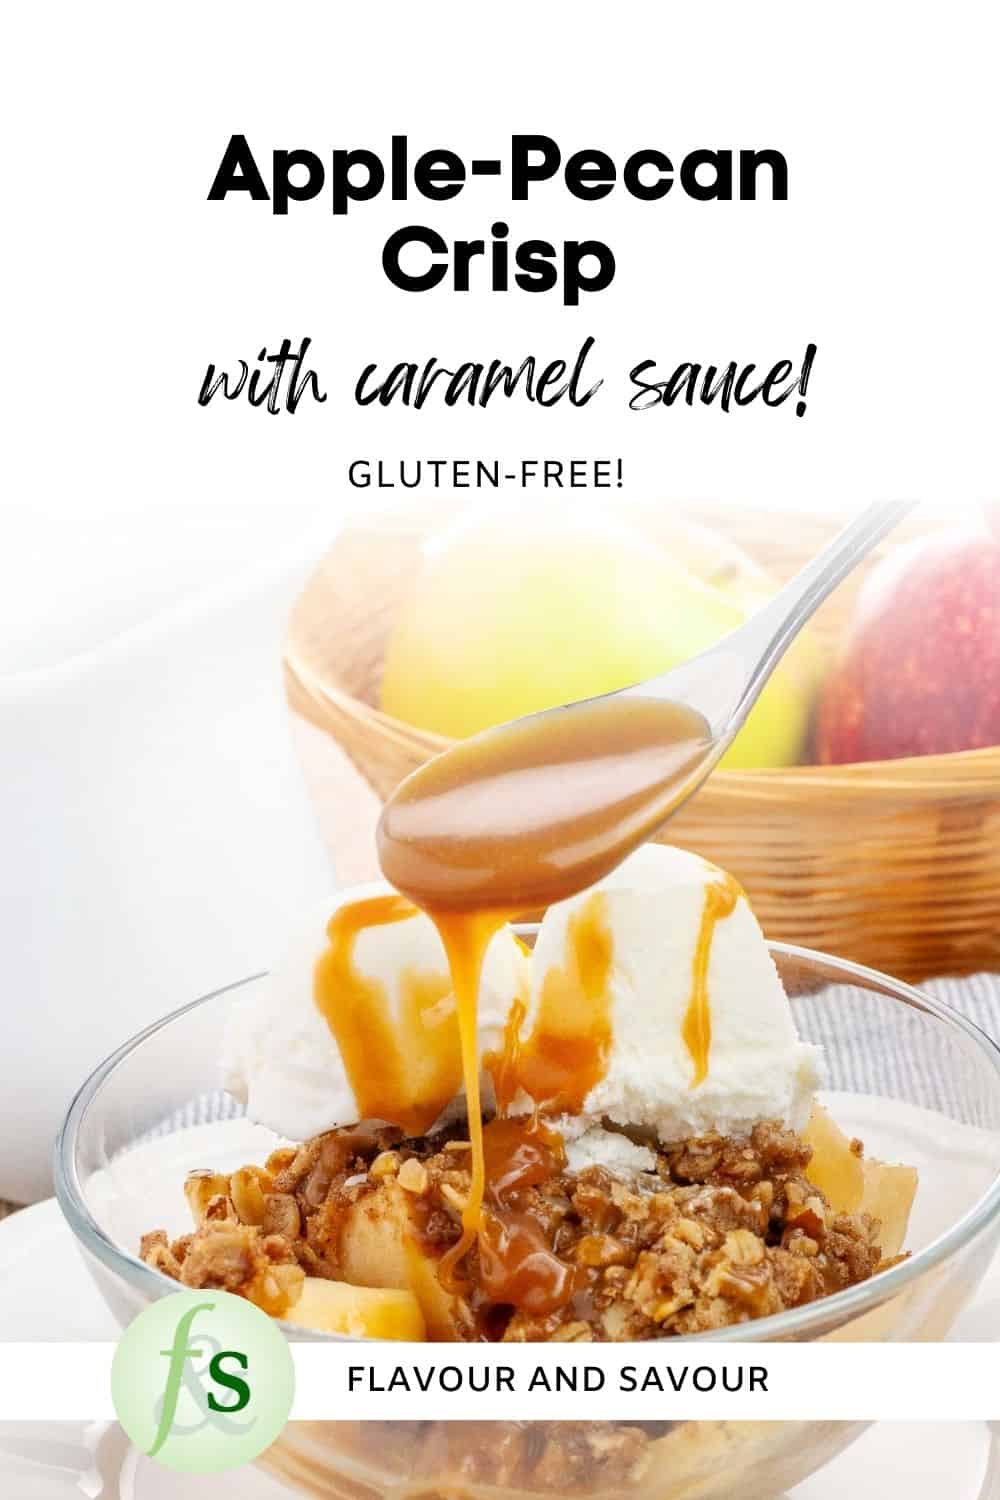 Image with text overlay for apple pecan crisp with caramel sauce.